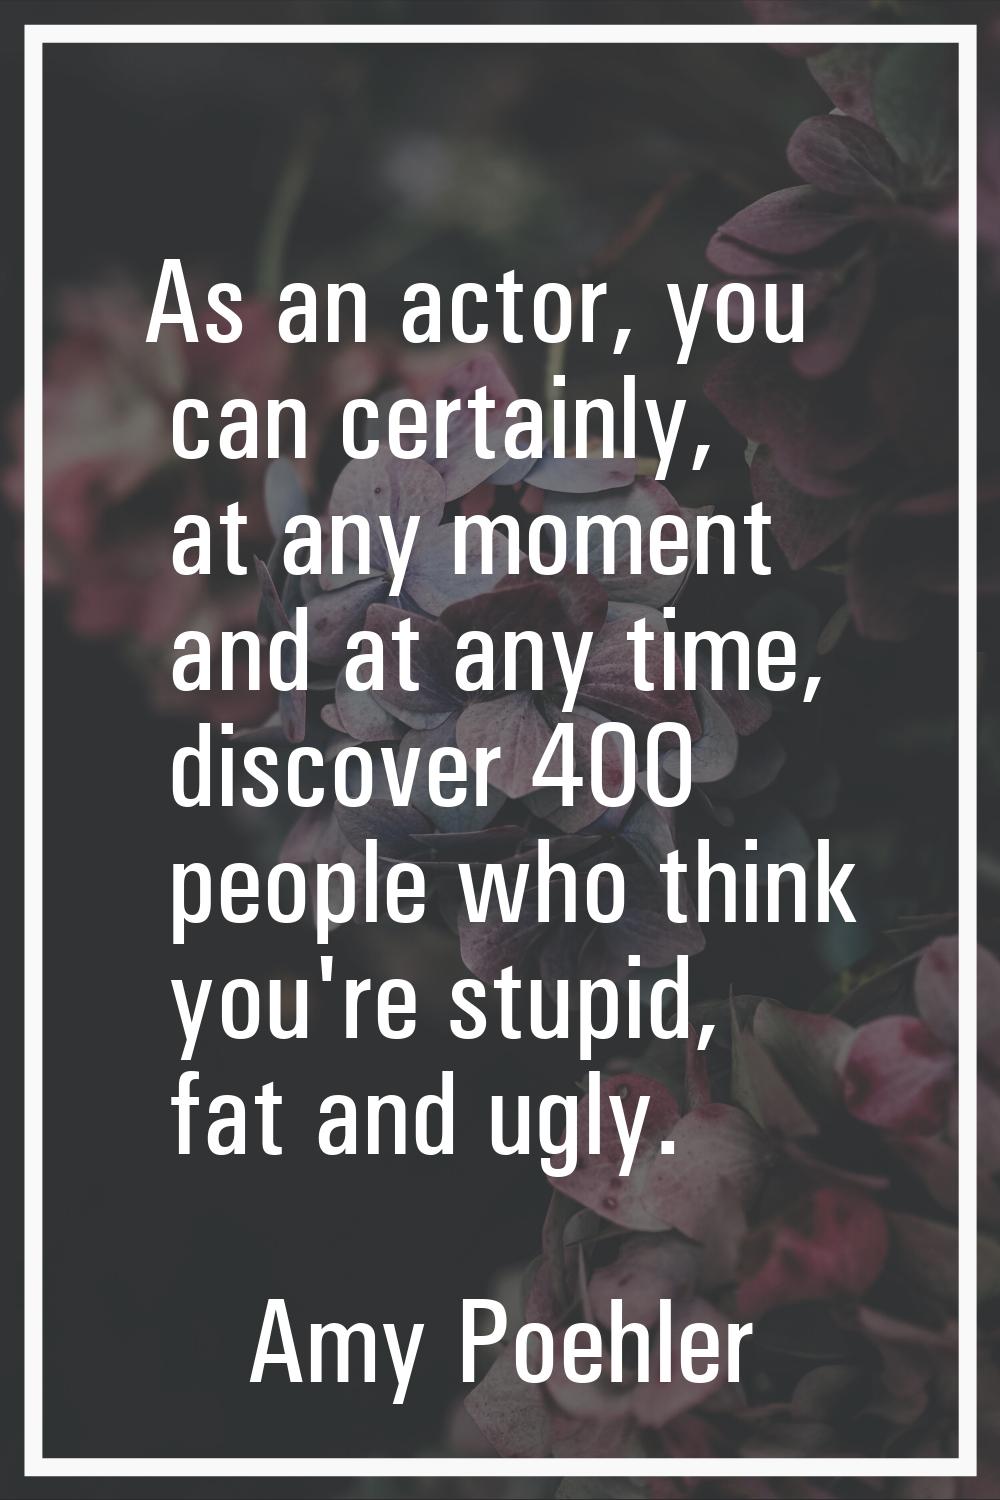 As an actor, you can certainly, at any moment and at any time, discover 400 people who think you're